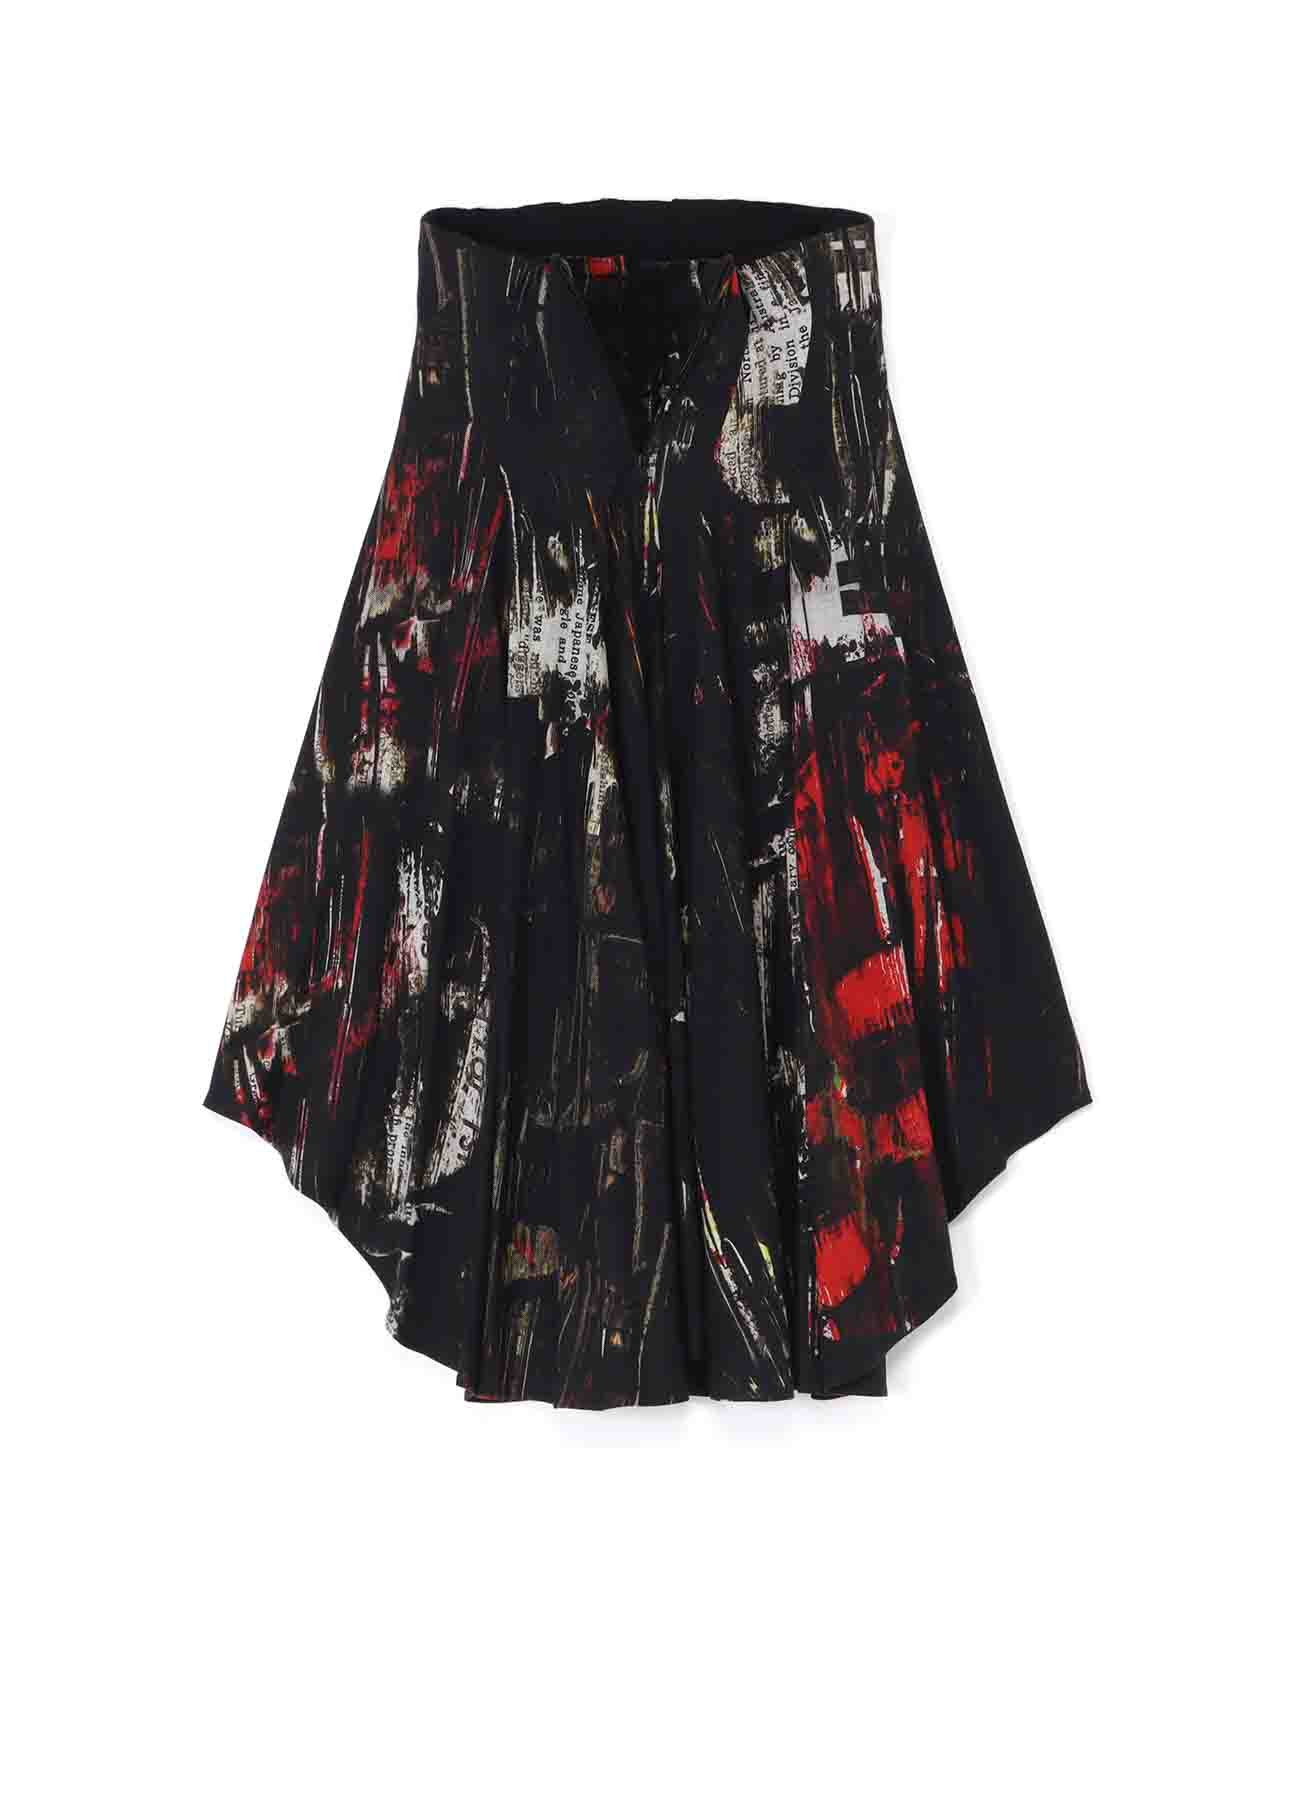 OIL PAINT PRINT LACE-UP DETAIL RAYON SKIRT